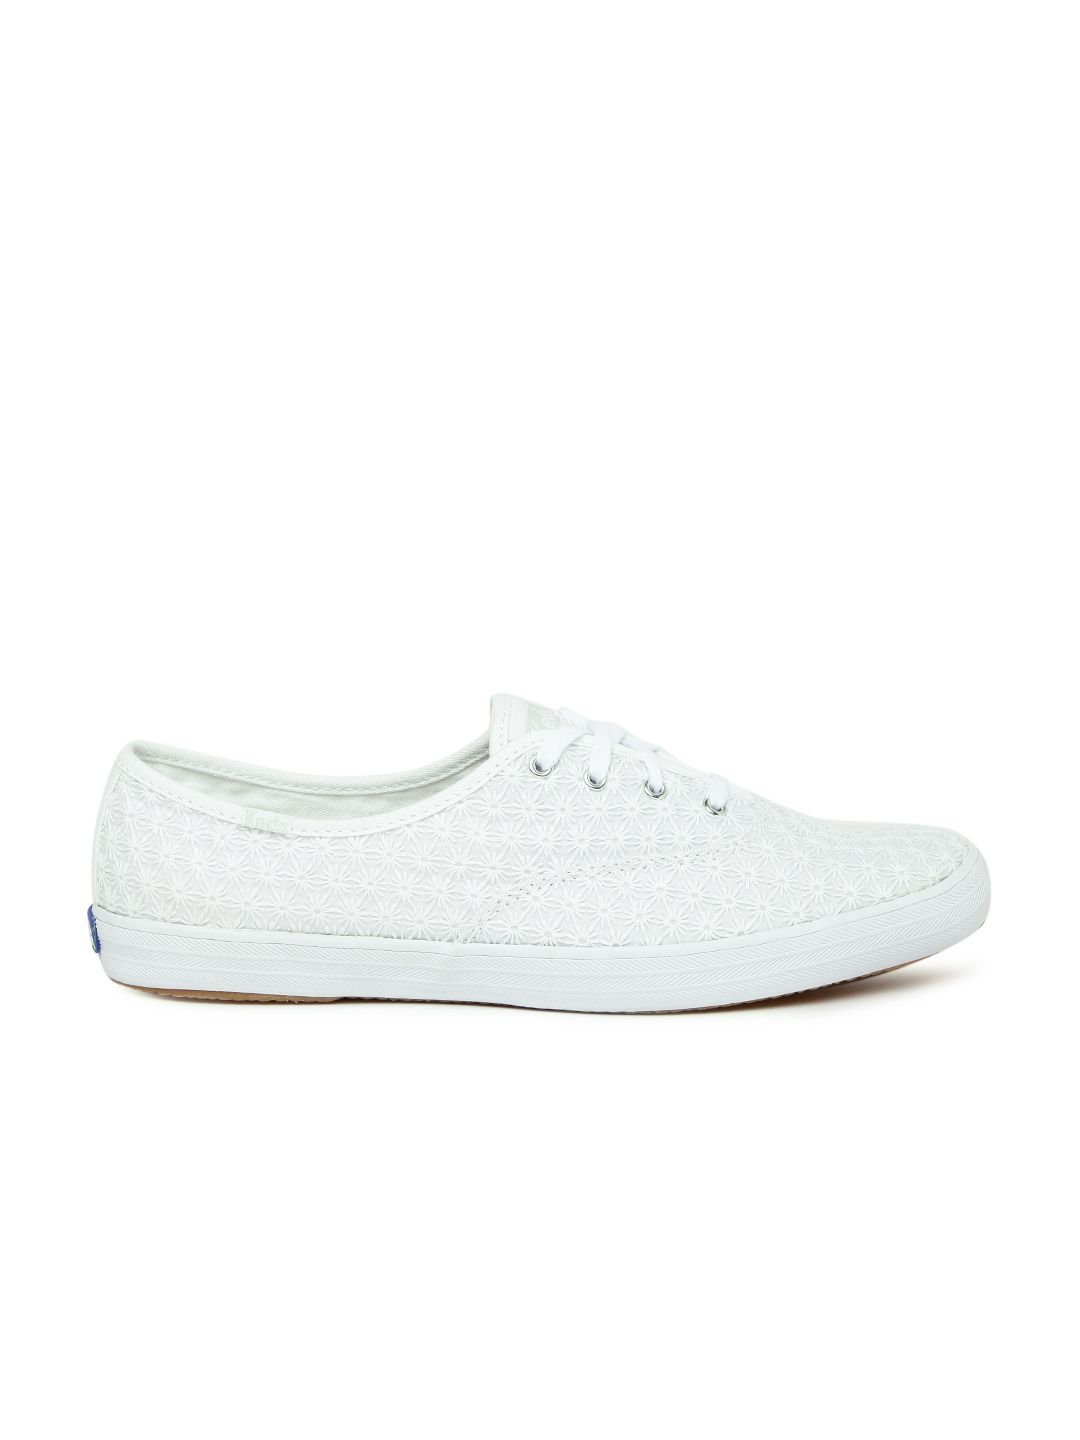 Keds White Casual Shoes Price in India- Buy Keds White Casual Shoes Online  at Snapdeal